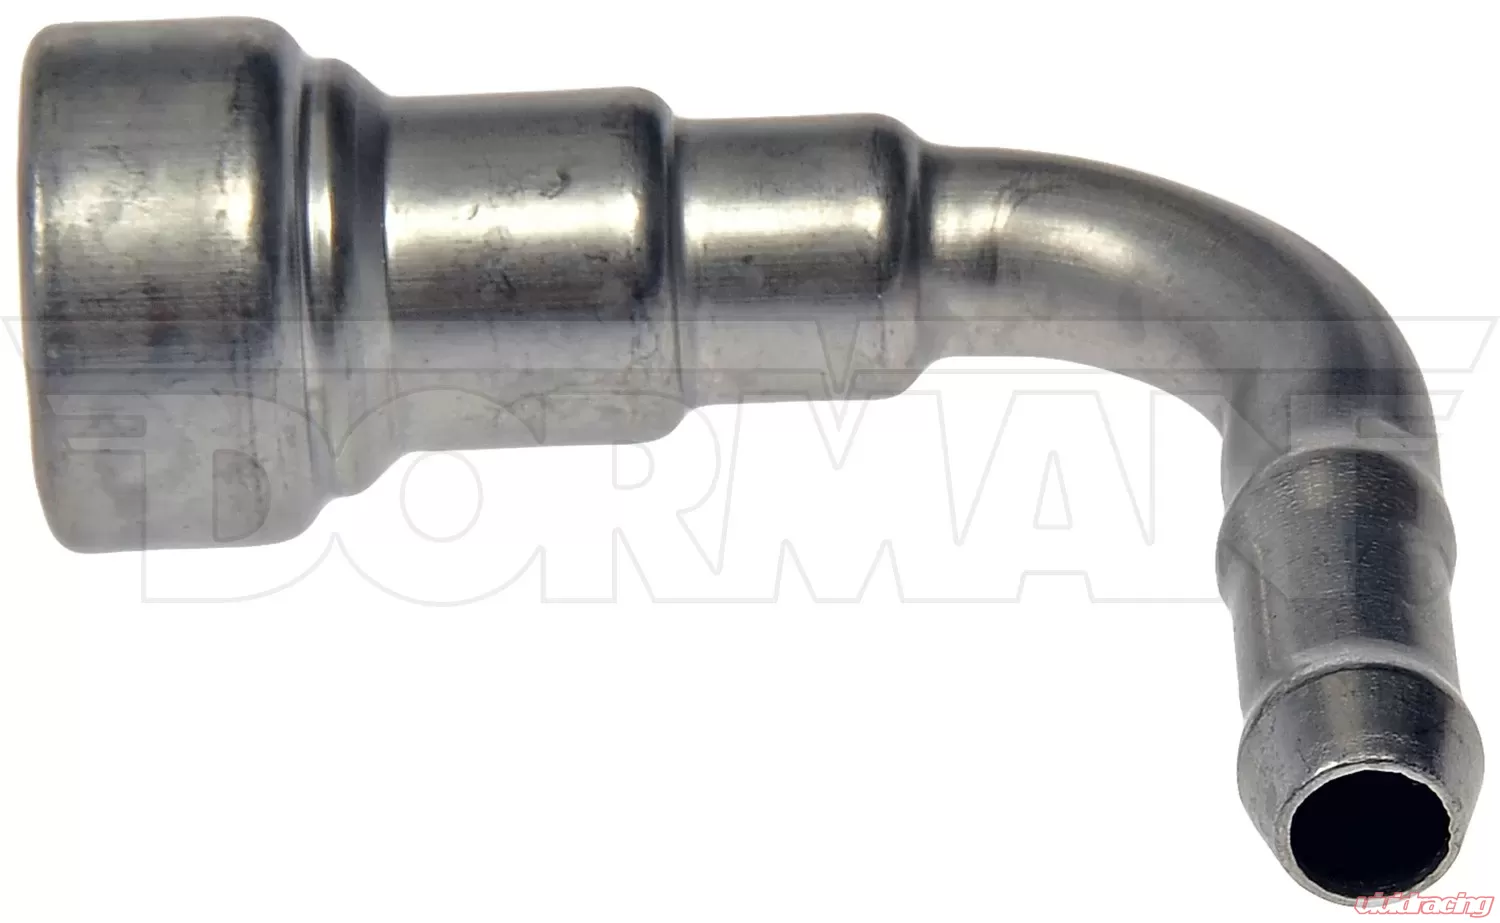 Dorman 3/8 In. Fuel Line Connector, Straight To 3/8 In. Barbed 800